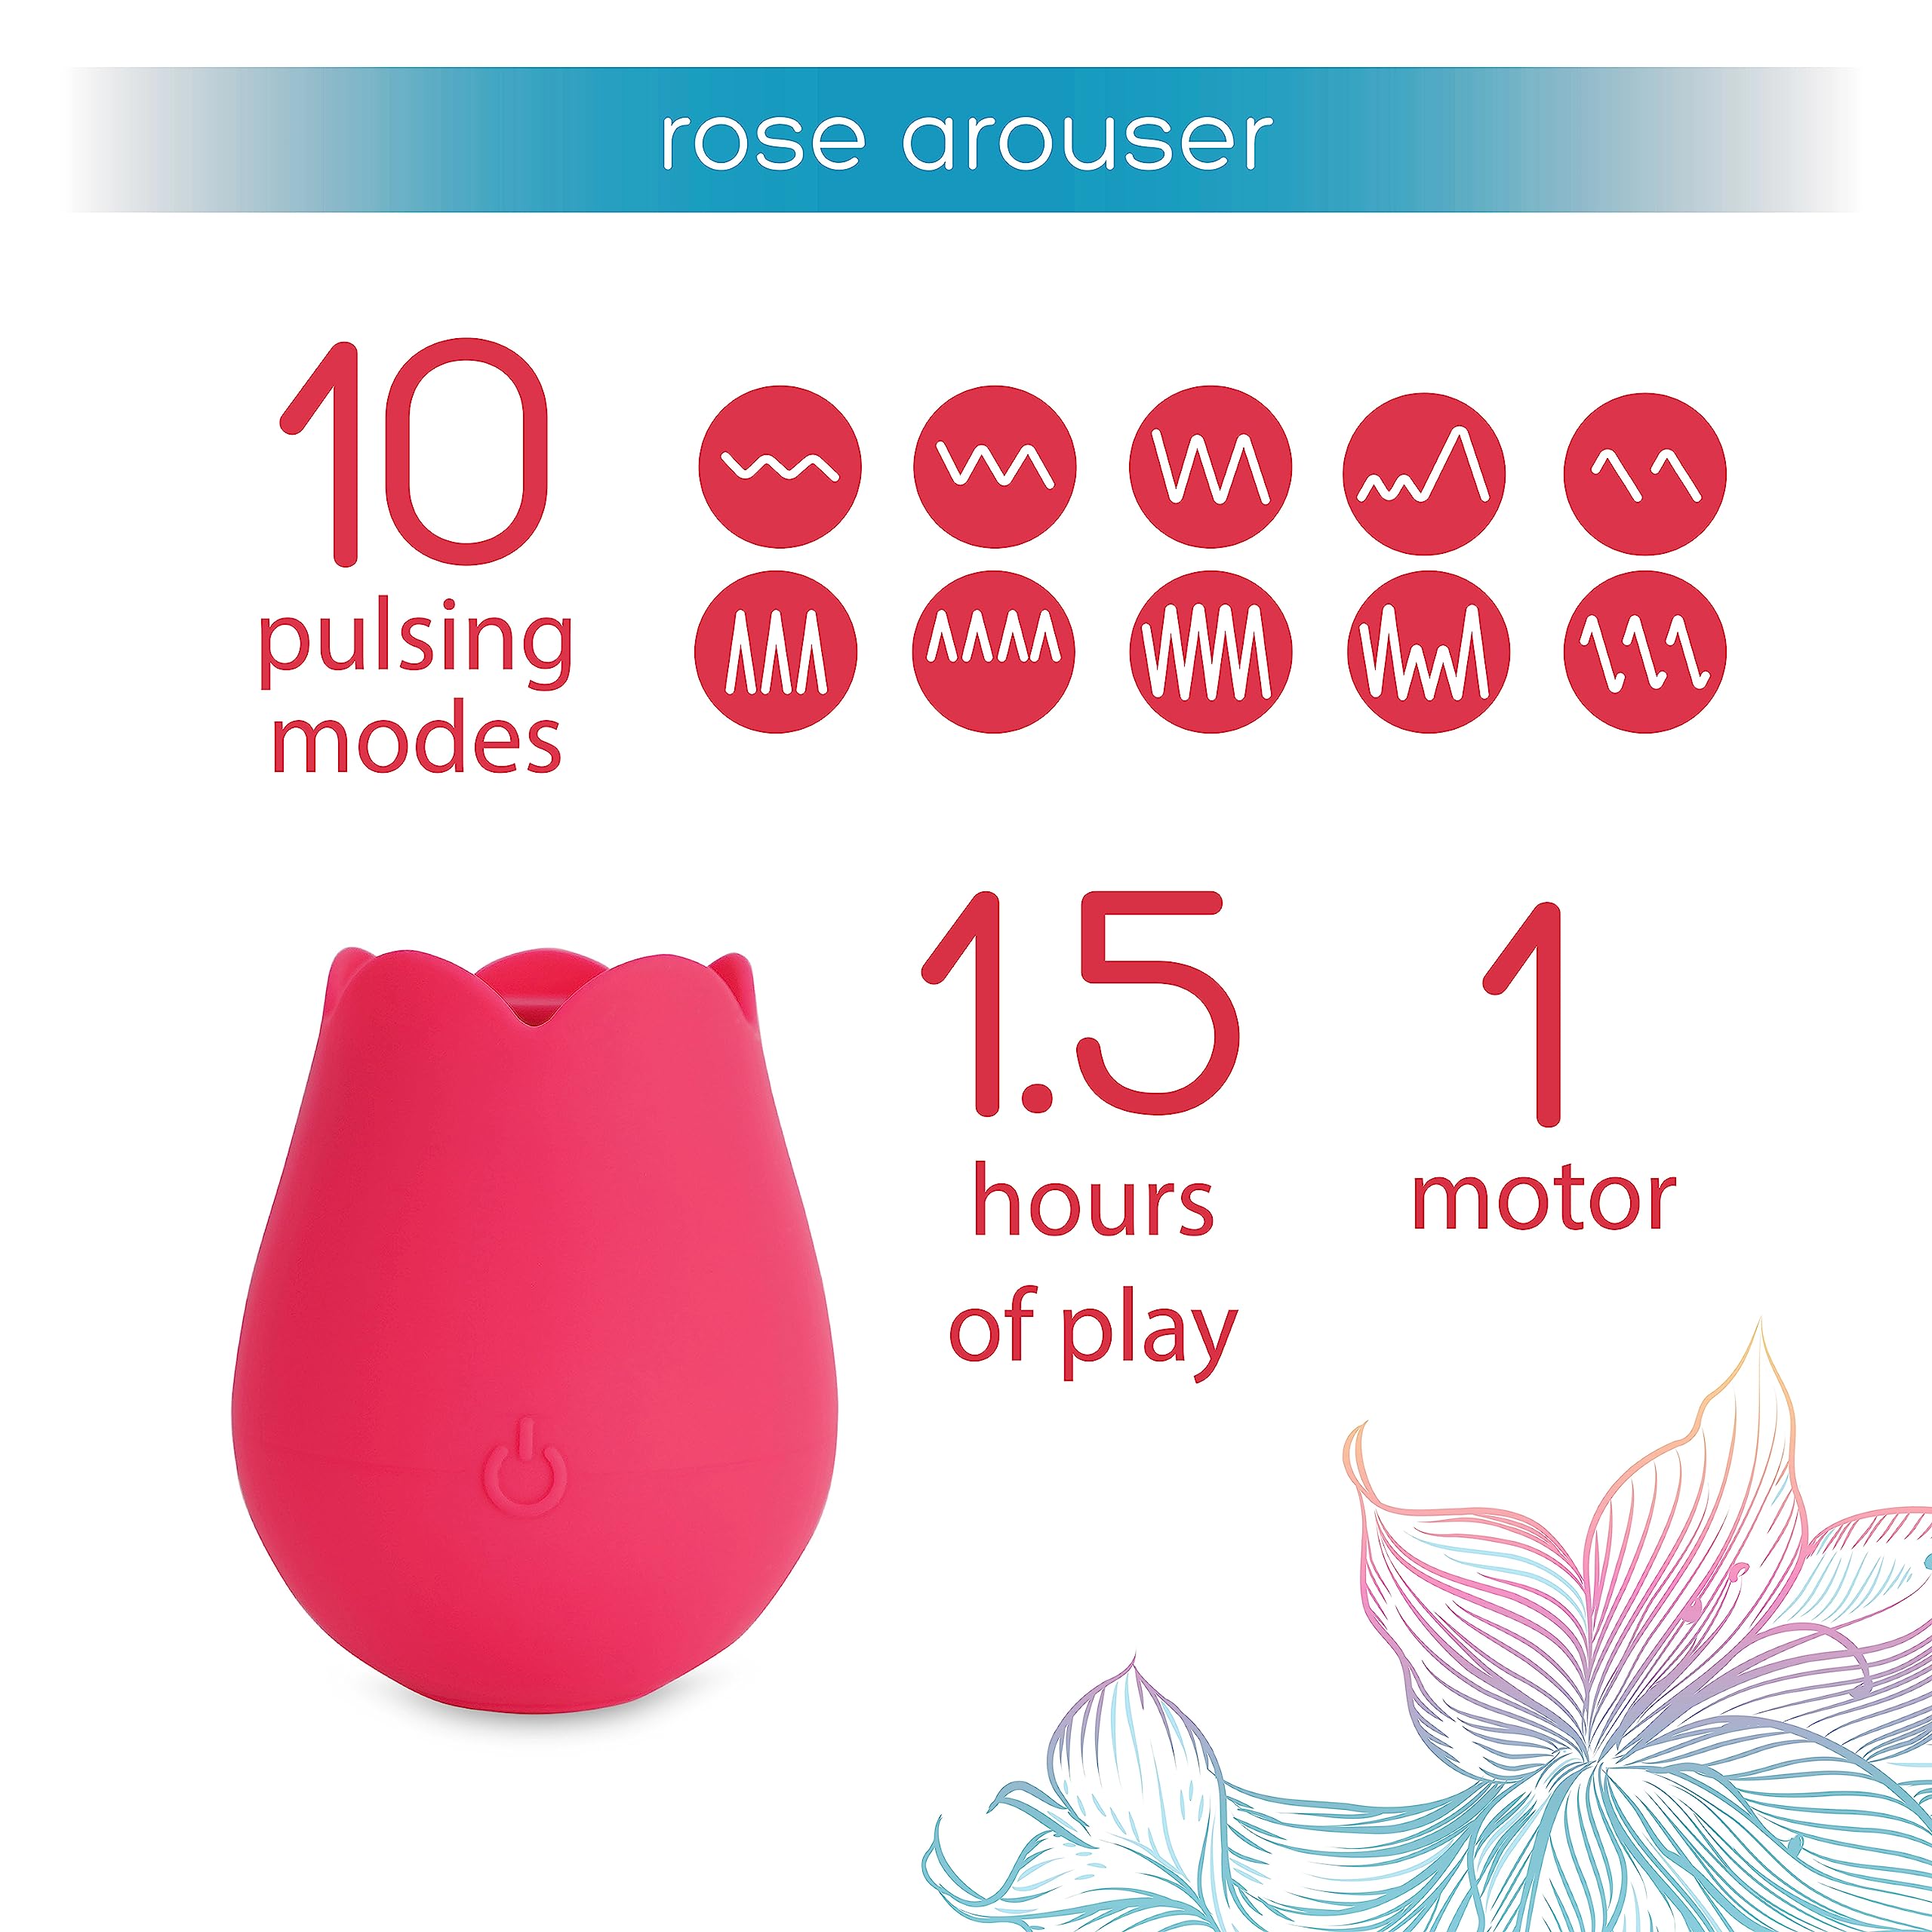 plusOne Rose Vibrator for Women - Clitoral Stimulator Made of Body-Safe Silicone, IPX-7 Waterproof, USB Rechargeable & 10 Pulsing Settings